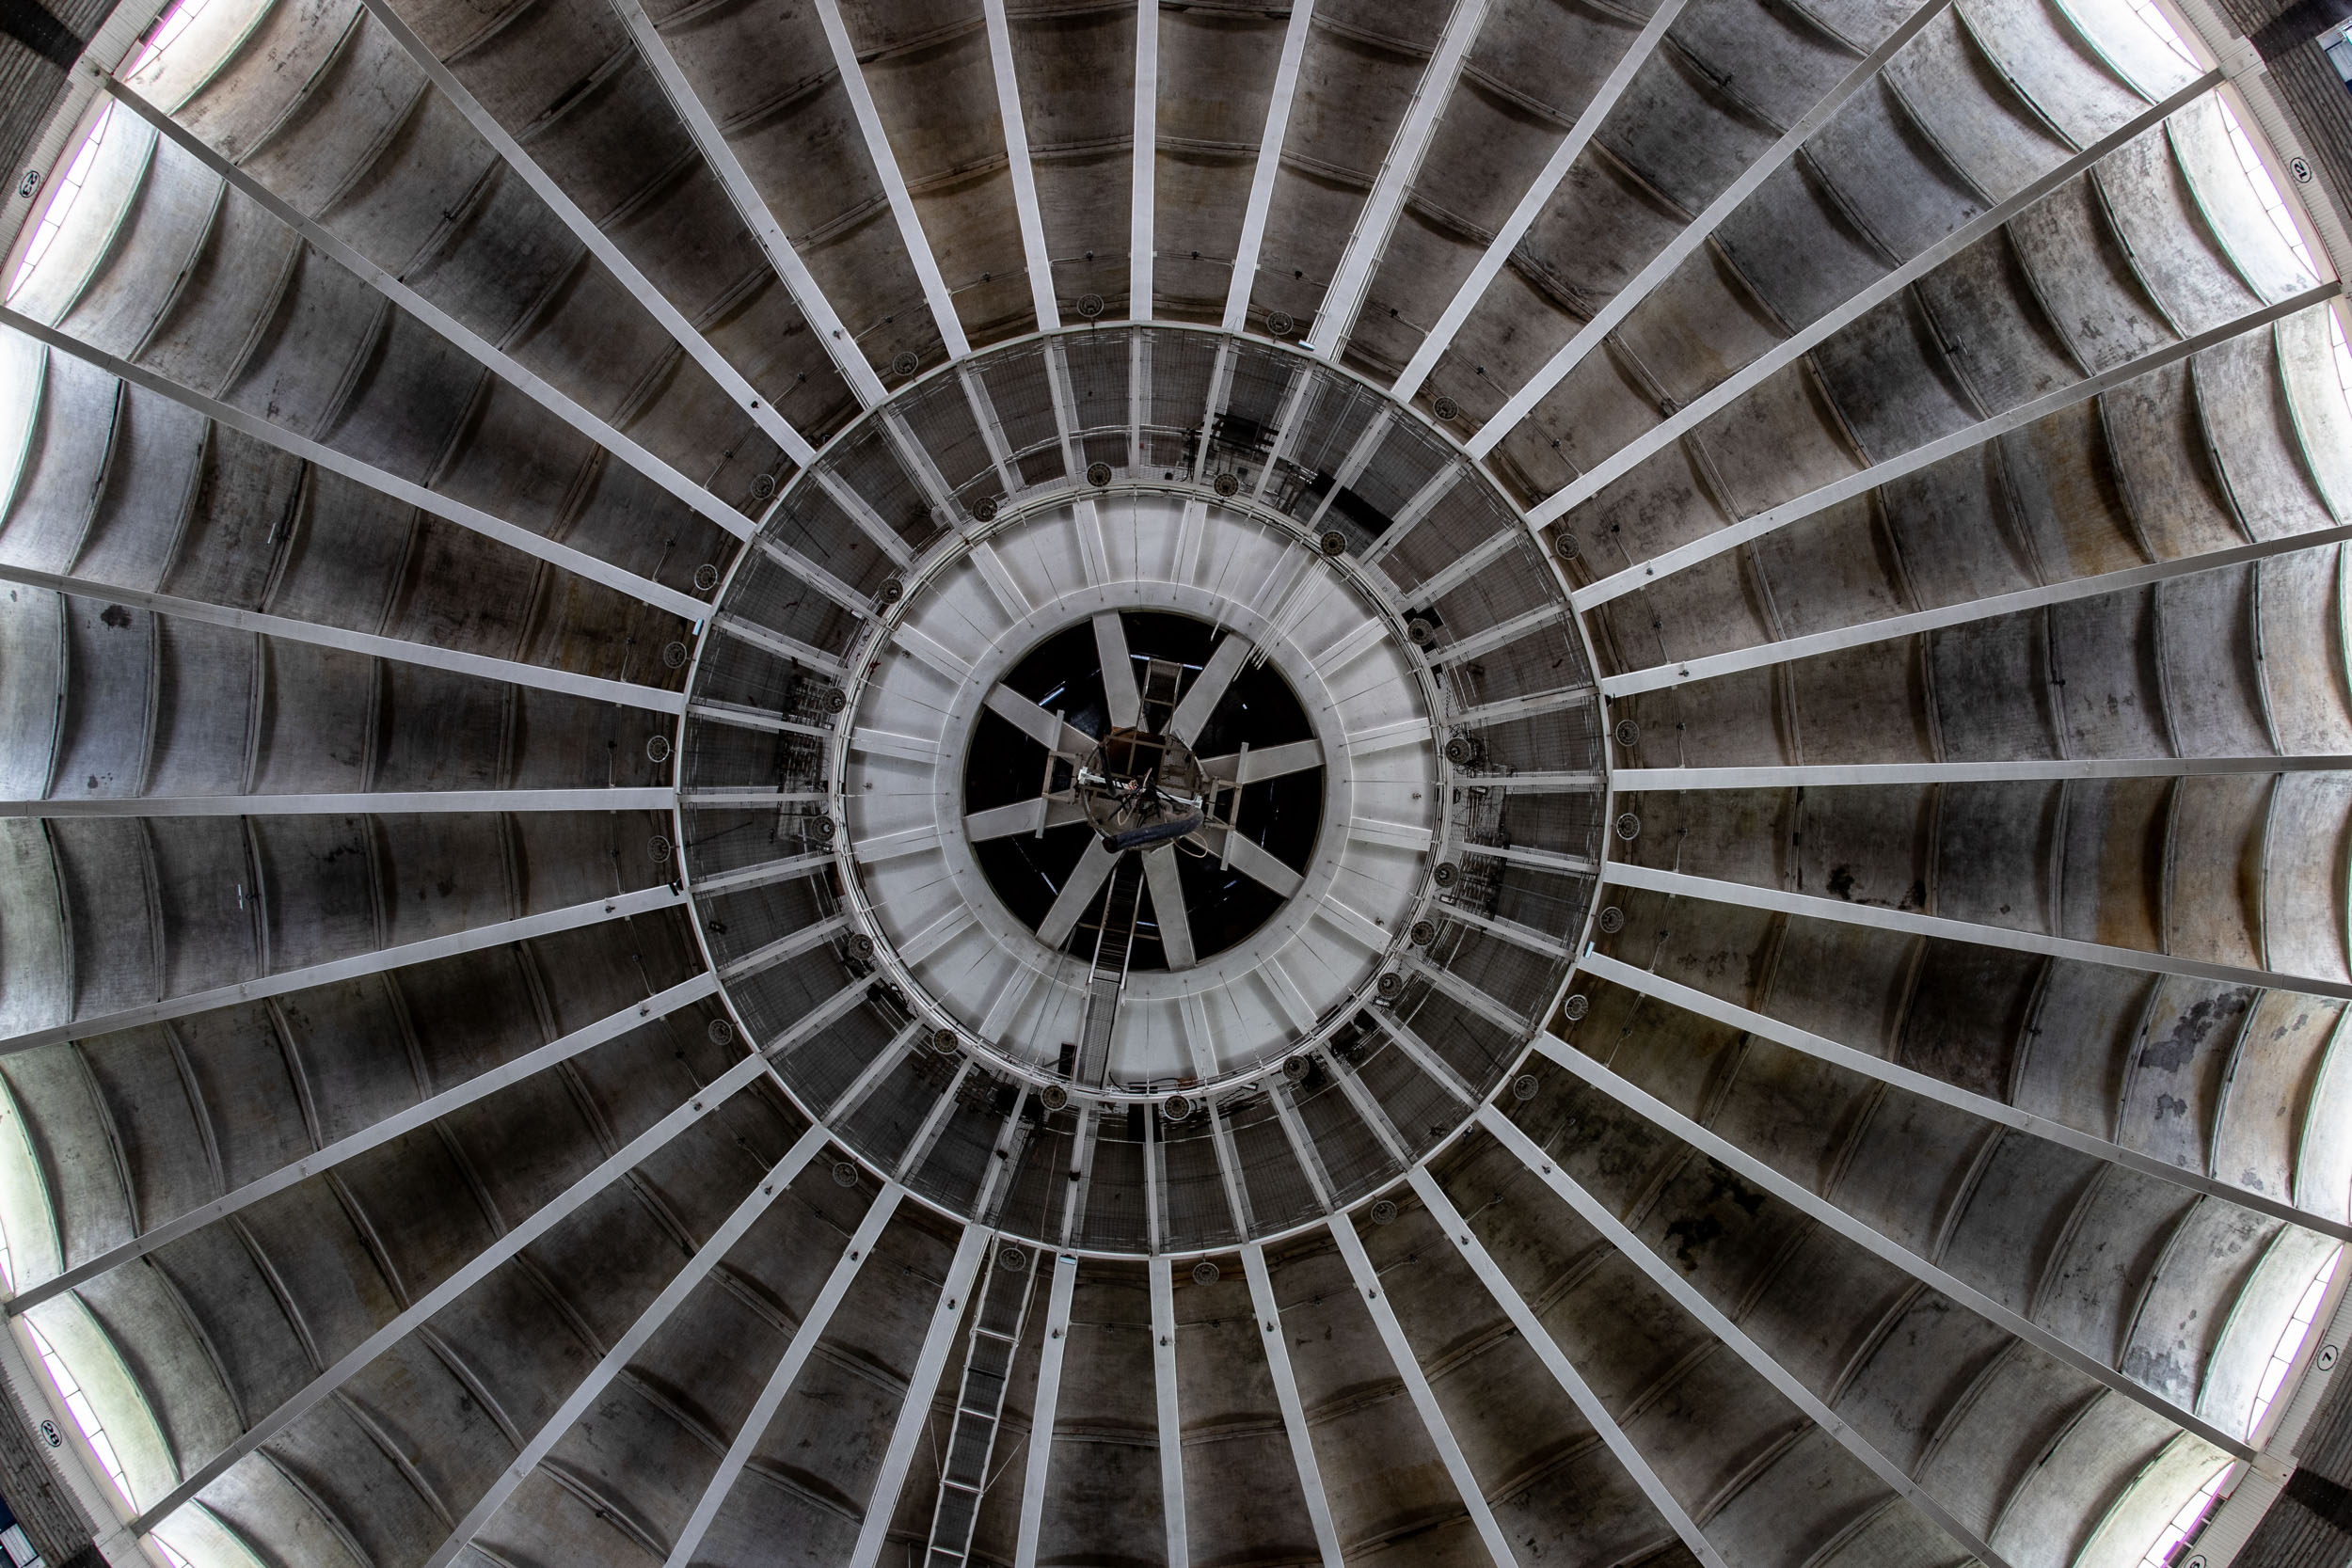 Looking up at the gutted UHall dome